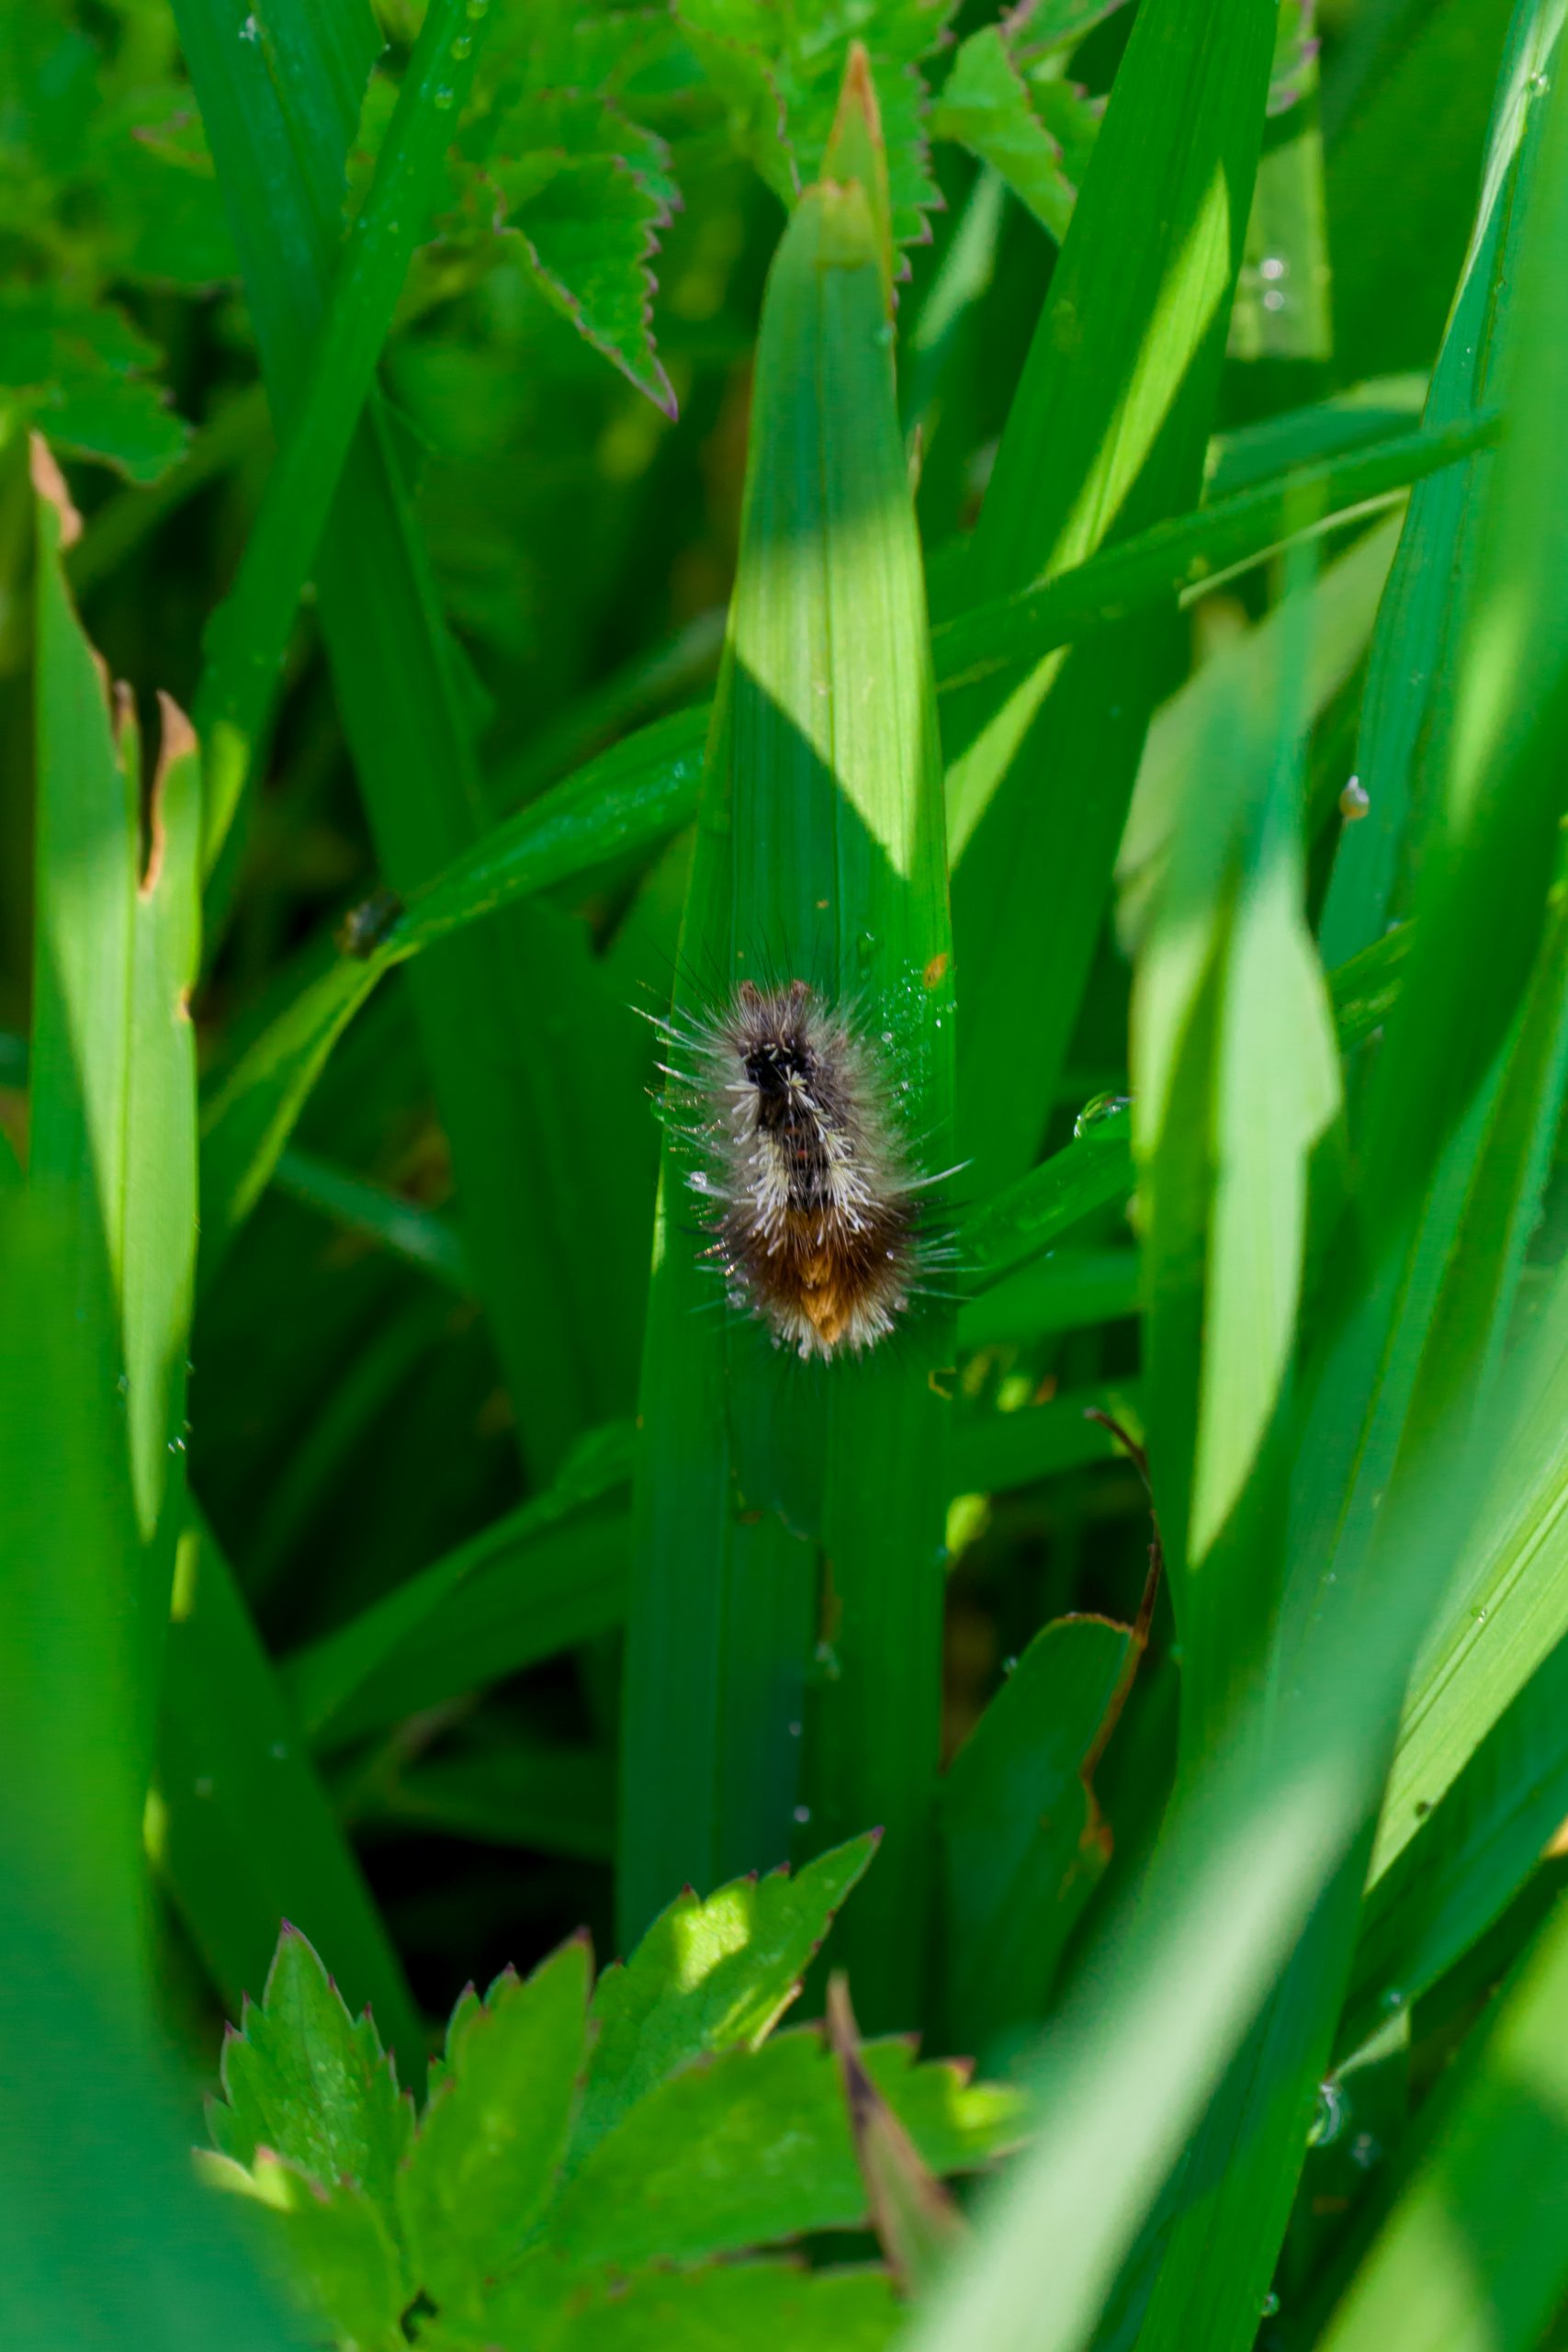 Small caterpillar on grass leaves